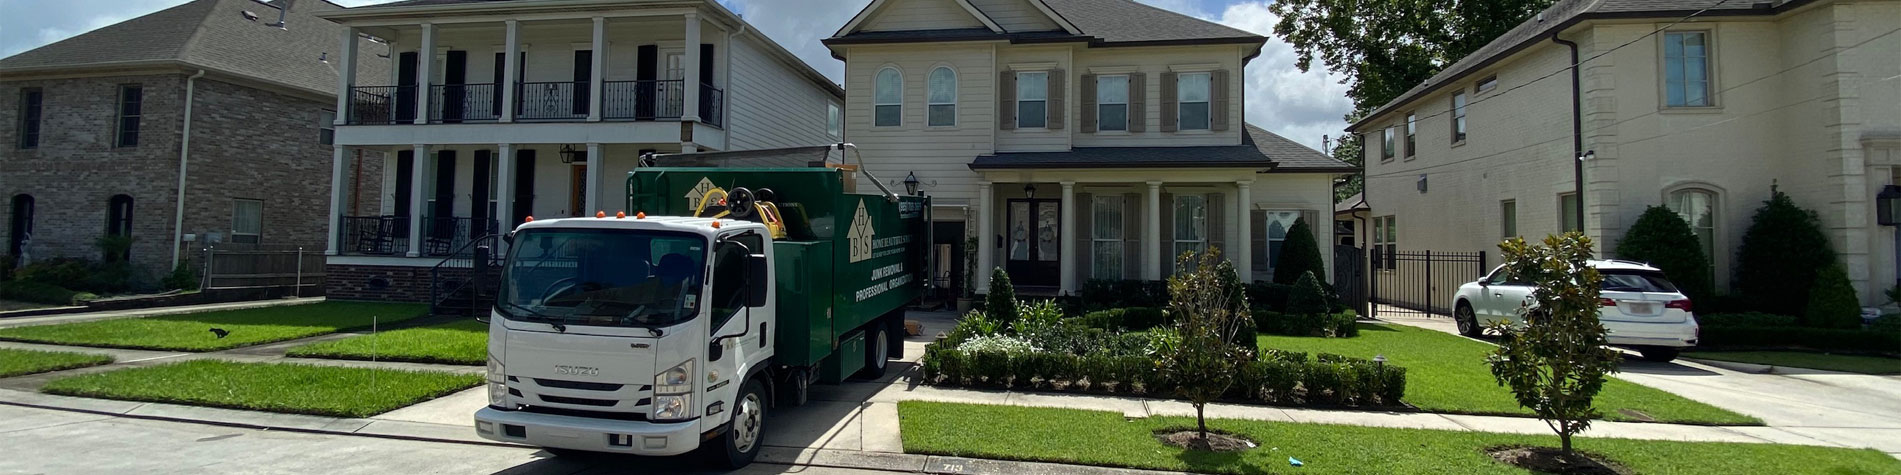 Junk Removal Truck in a Covington Neighborhood Completing Junk Removal Work